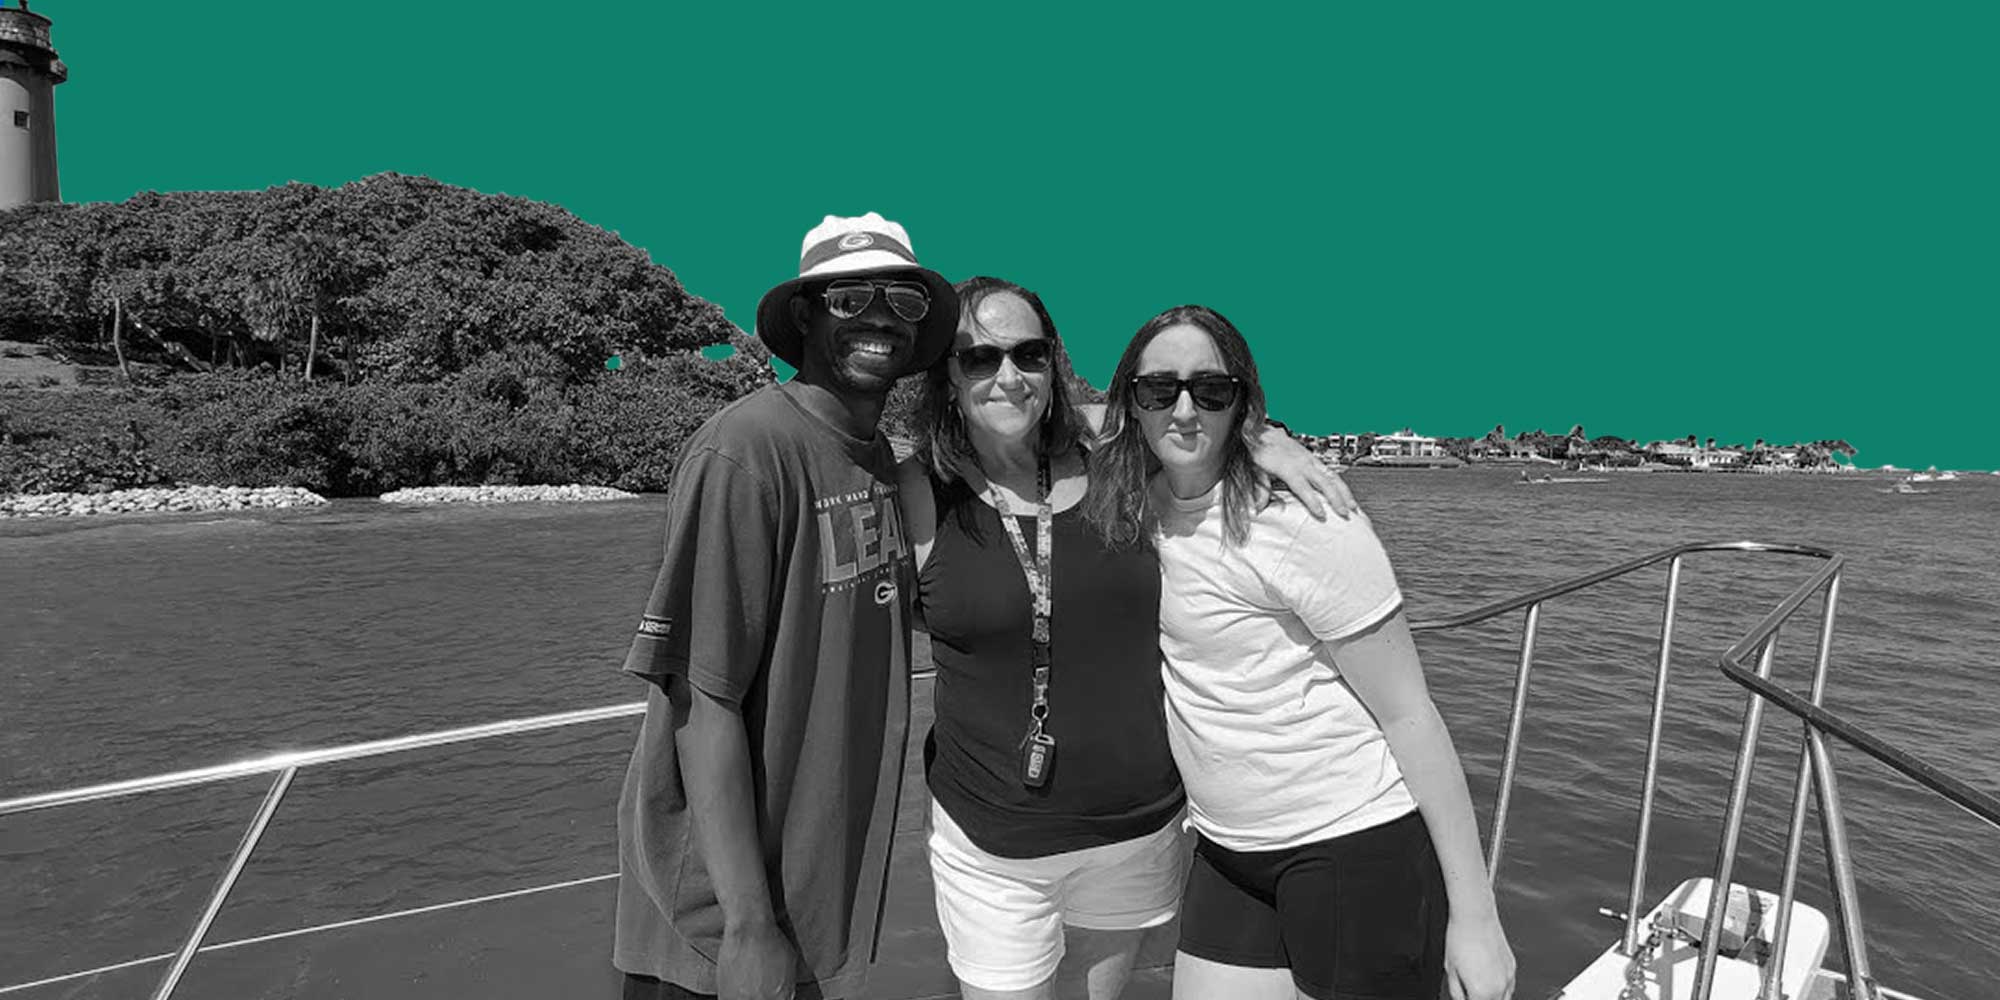 A family of one African American man and two White women on a boat